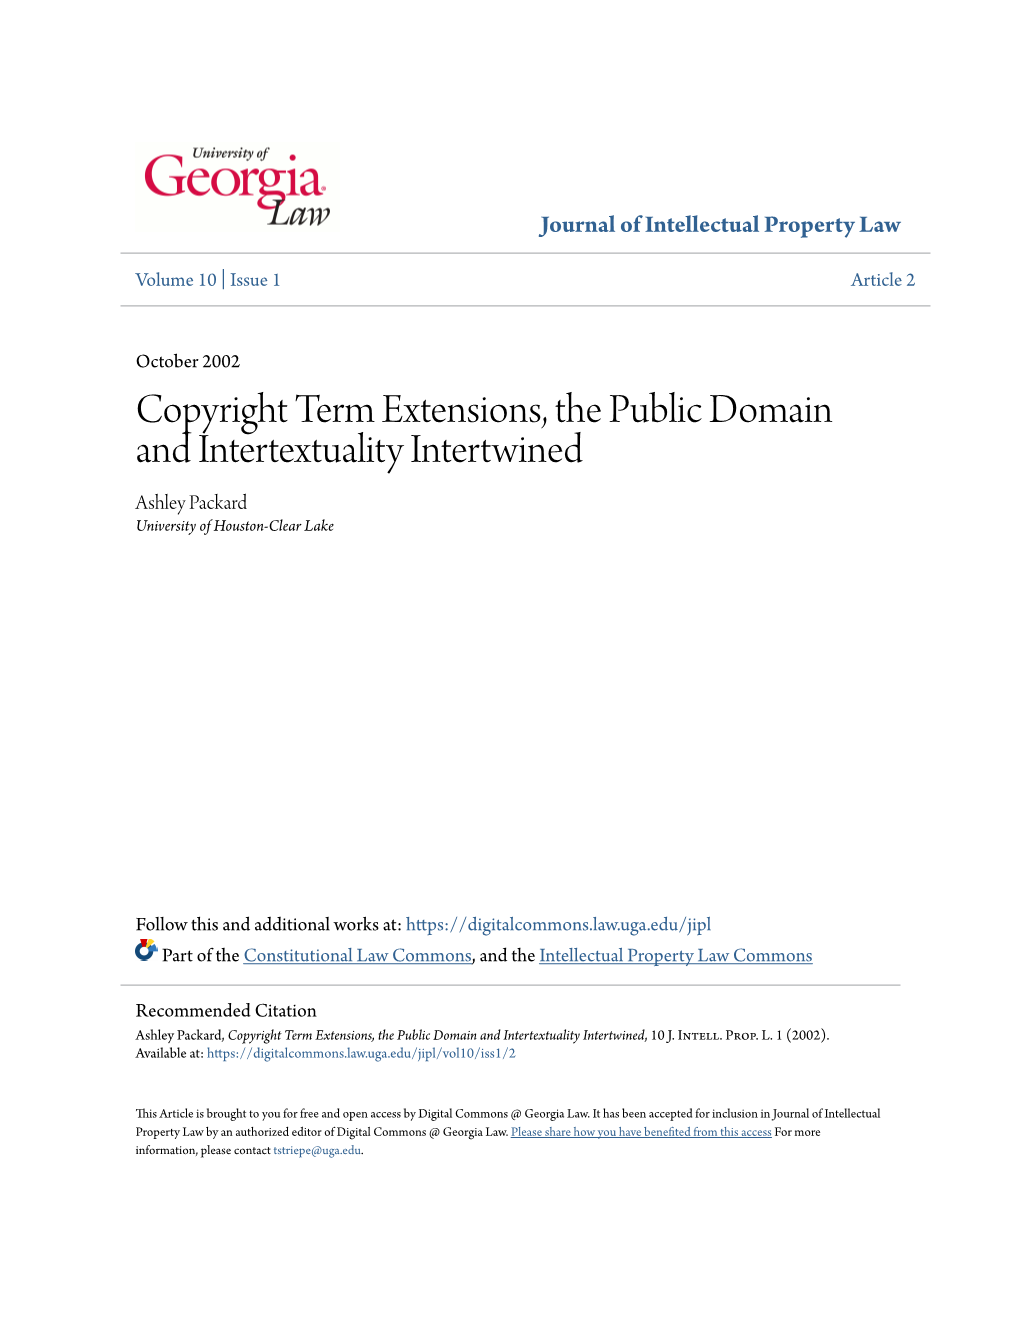 Copyright Term Extensions, the Public Domain and Intertextuality Intertwined Ashley Packard University of Houston-Clear Lake